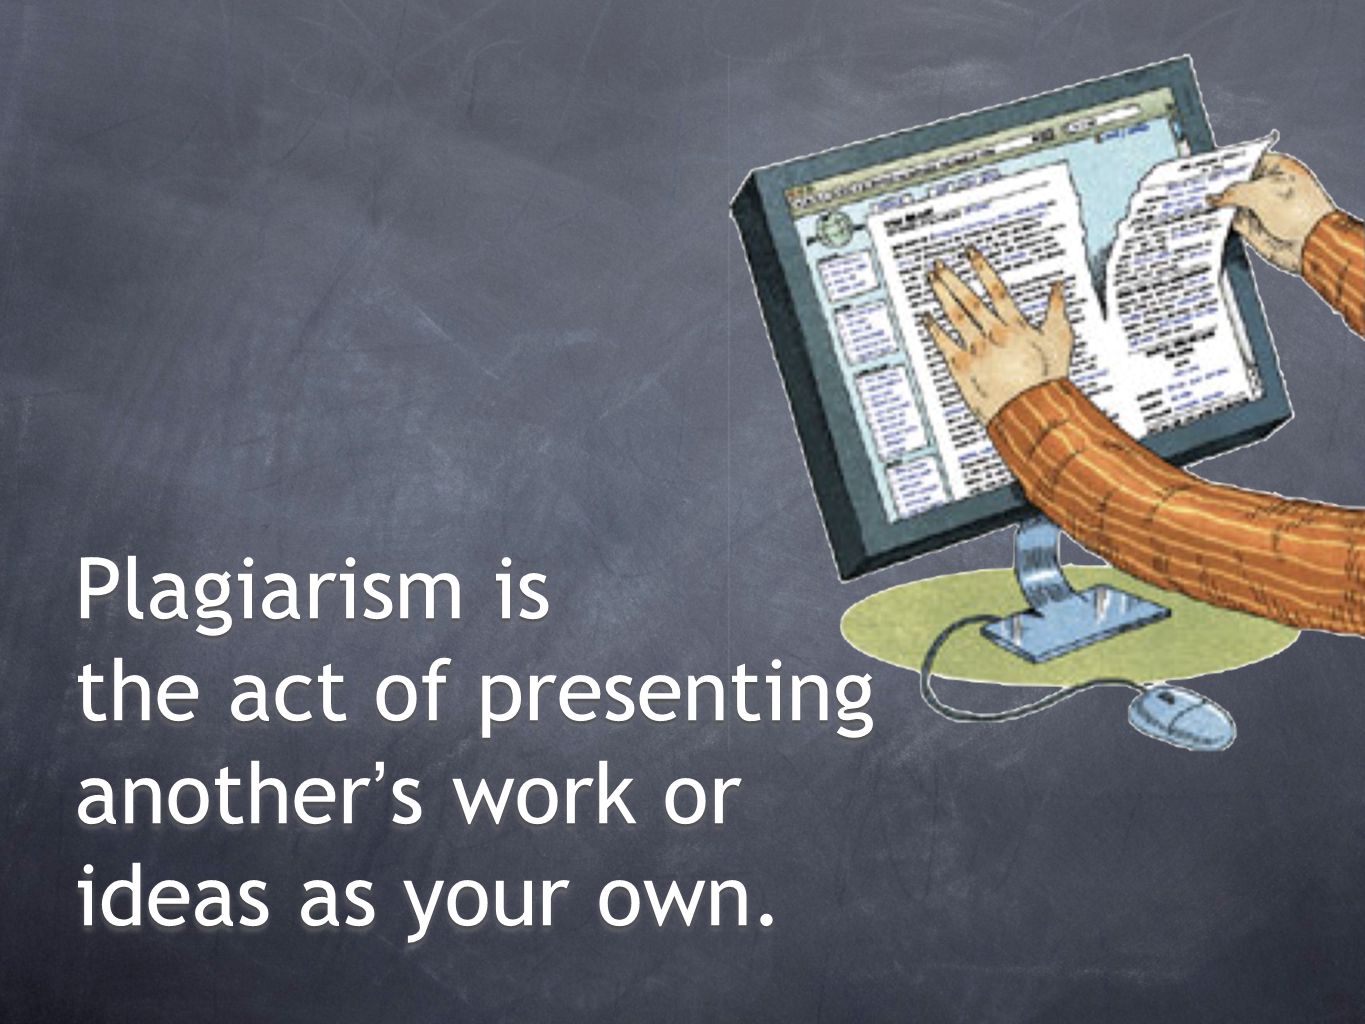 Plagiarism is the act of presenting another’s work or ideas as your own.